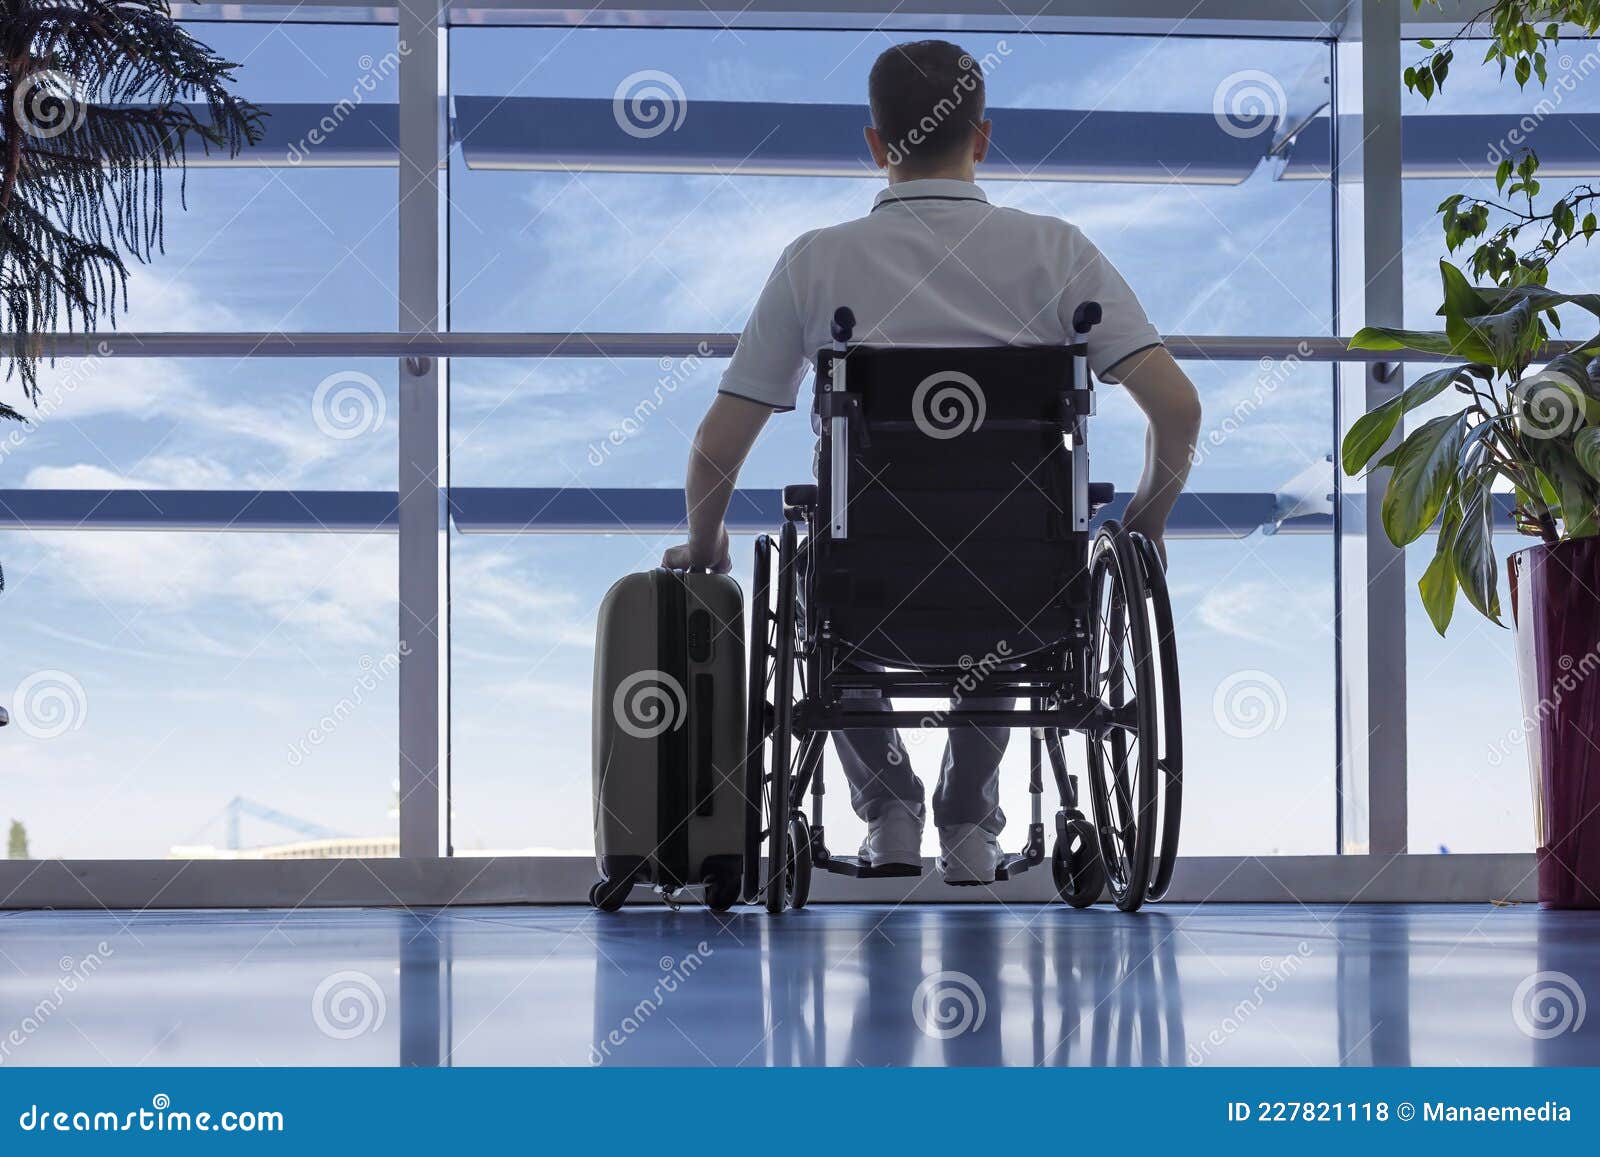 young man in a wheelchair at the airport